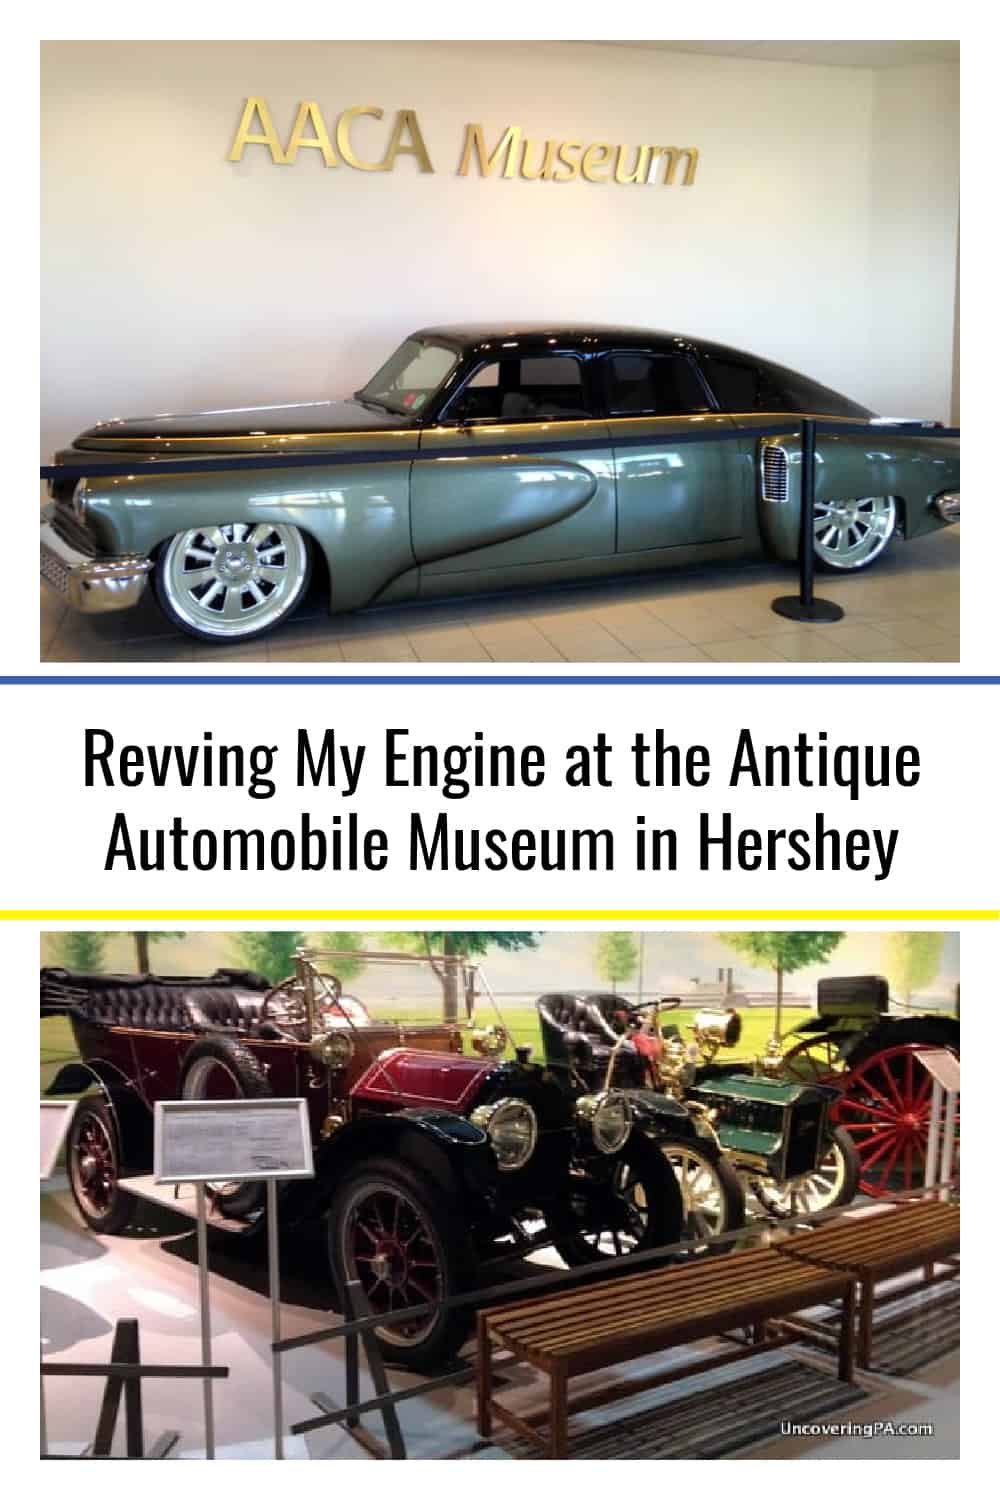 Revving My Engine at the Antique Automobile Museum in Hershey